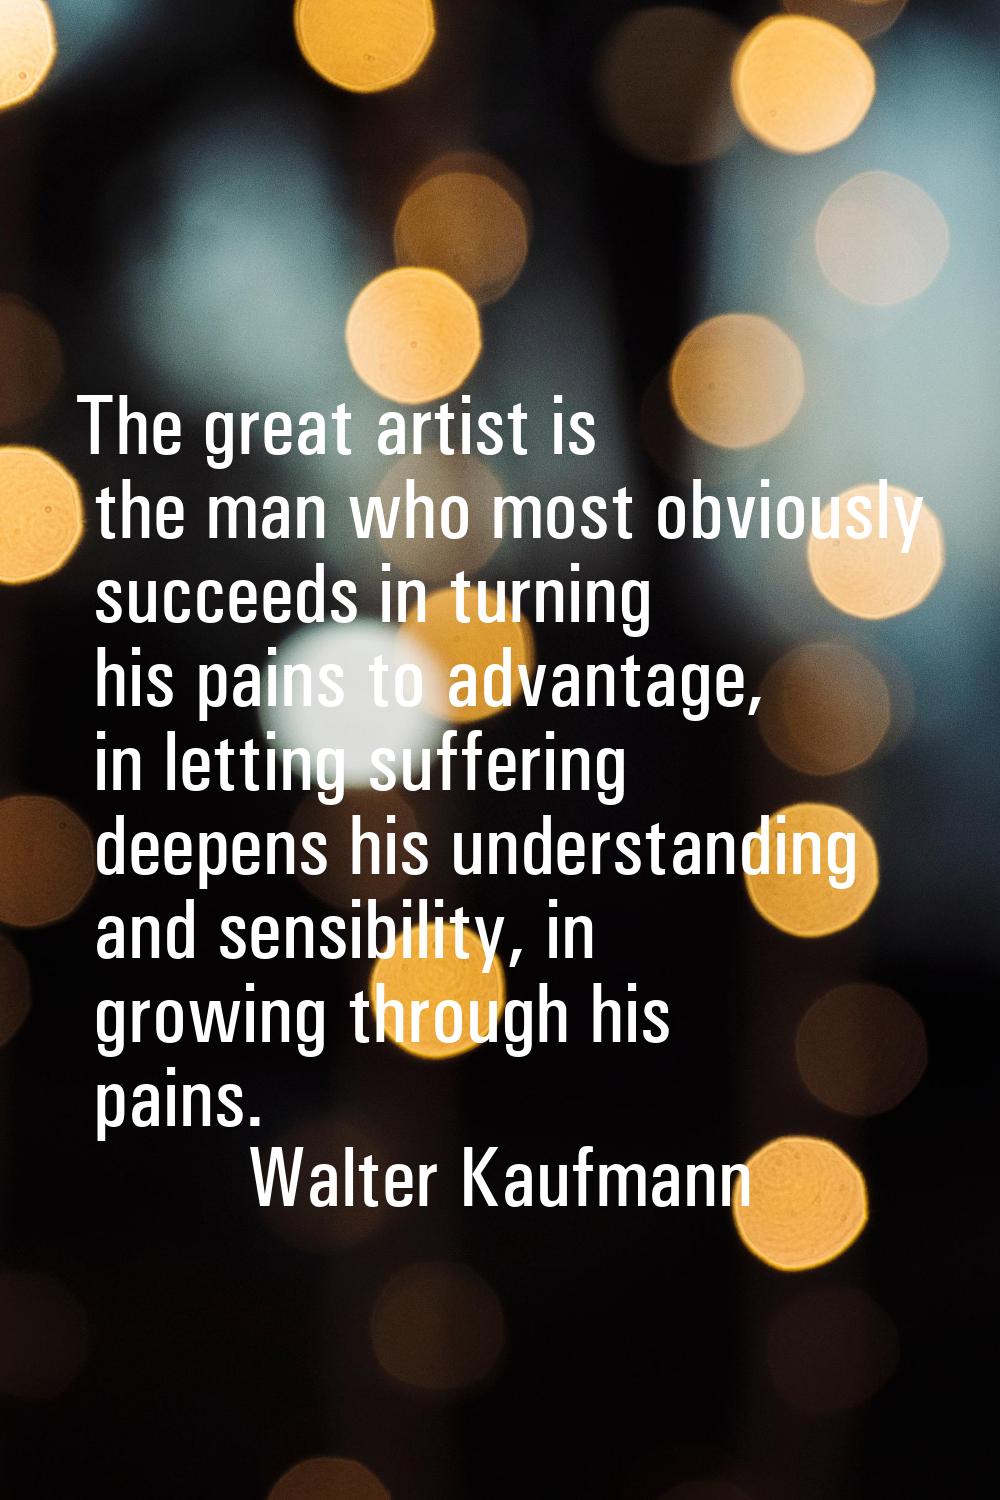 The great artist is the man who most obviously succeeds in turning his pains to advantage, in letti